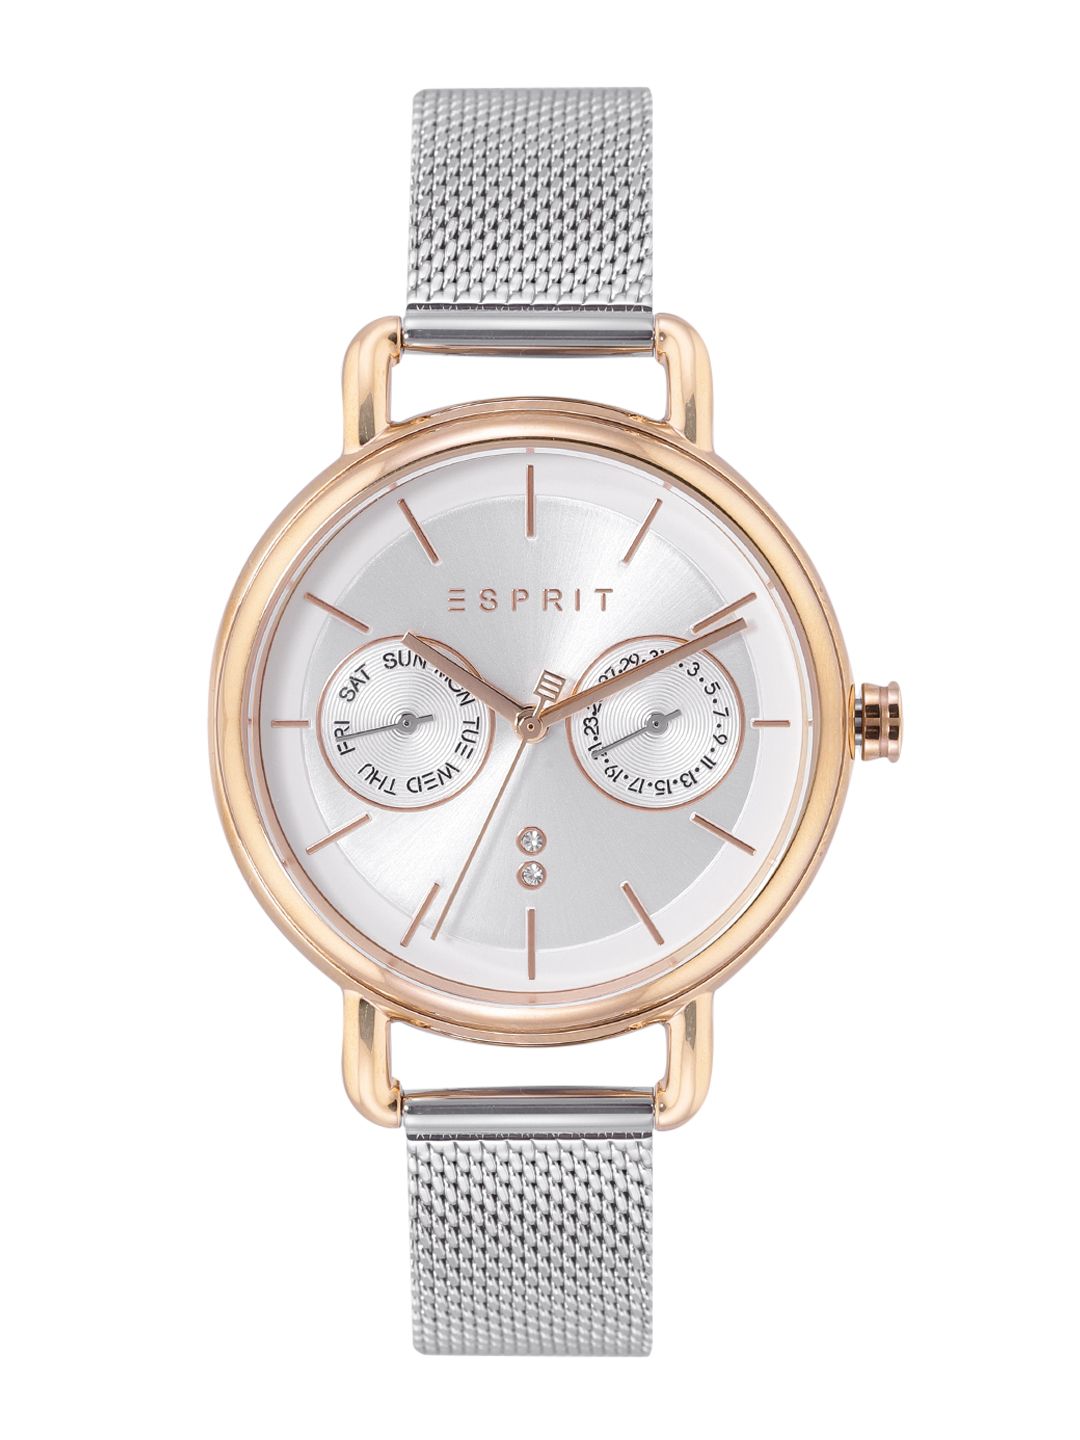 ESPRIT Women Silver-Toned Analogue Watch ES1L179M0115 Price in India